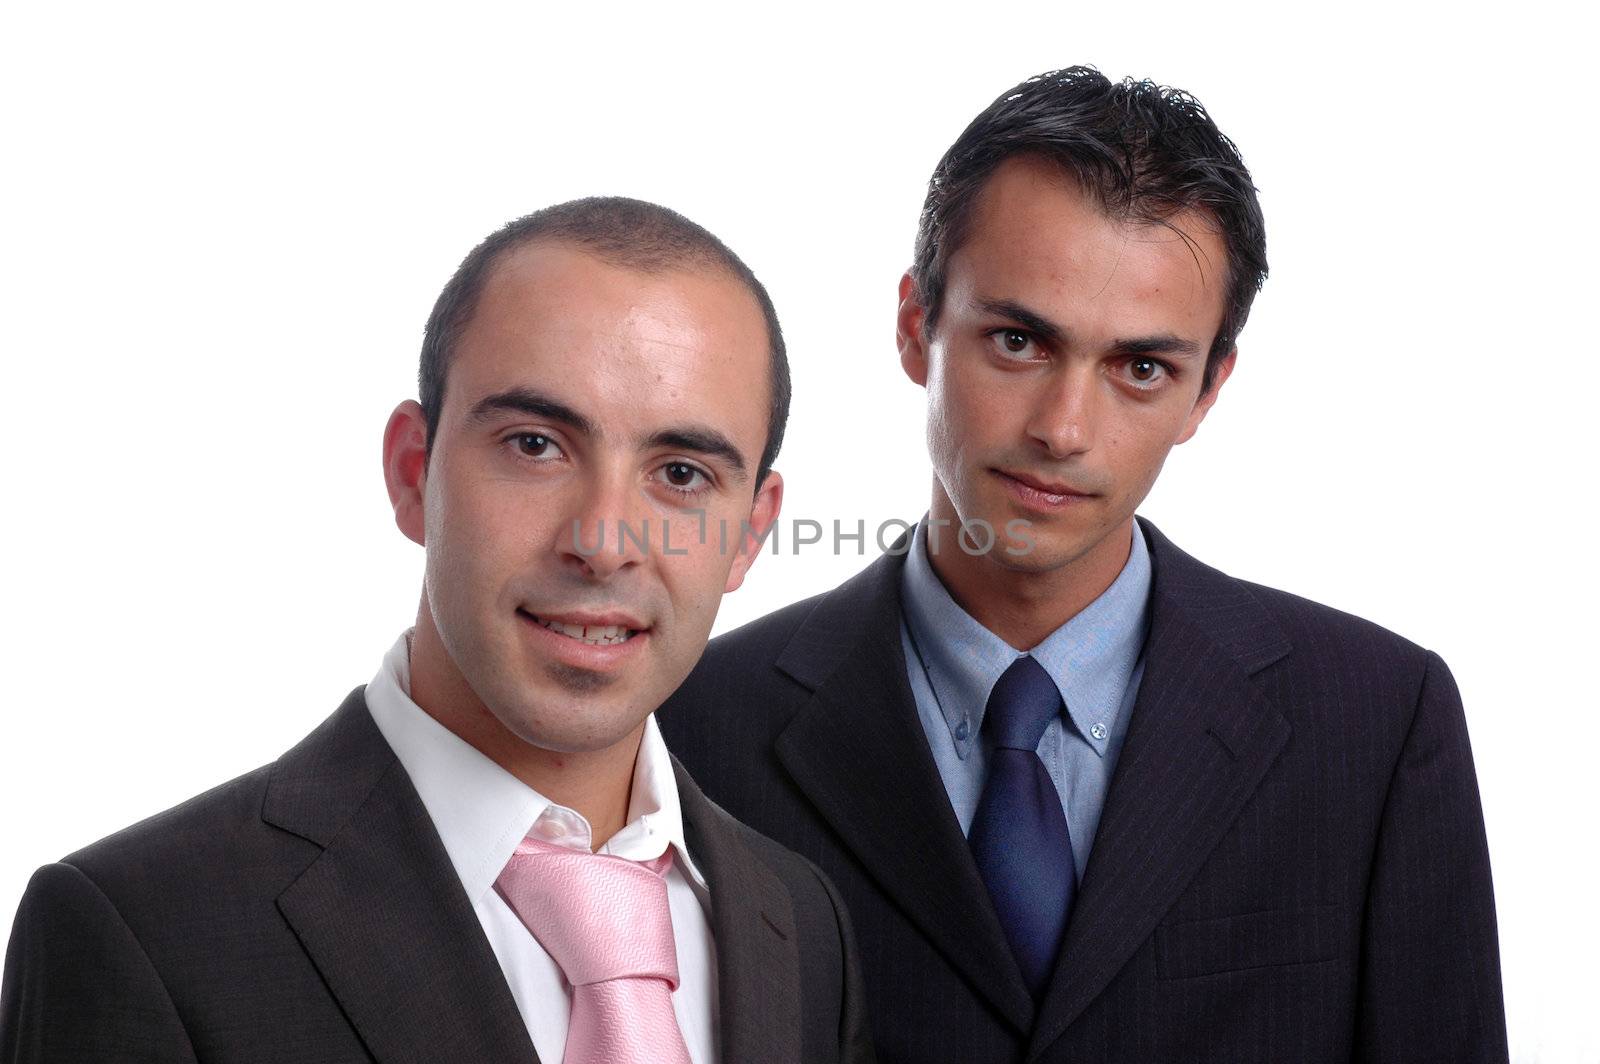 two businessman portrait over white background by raalves